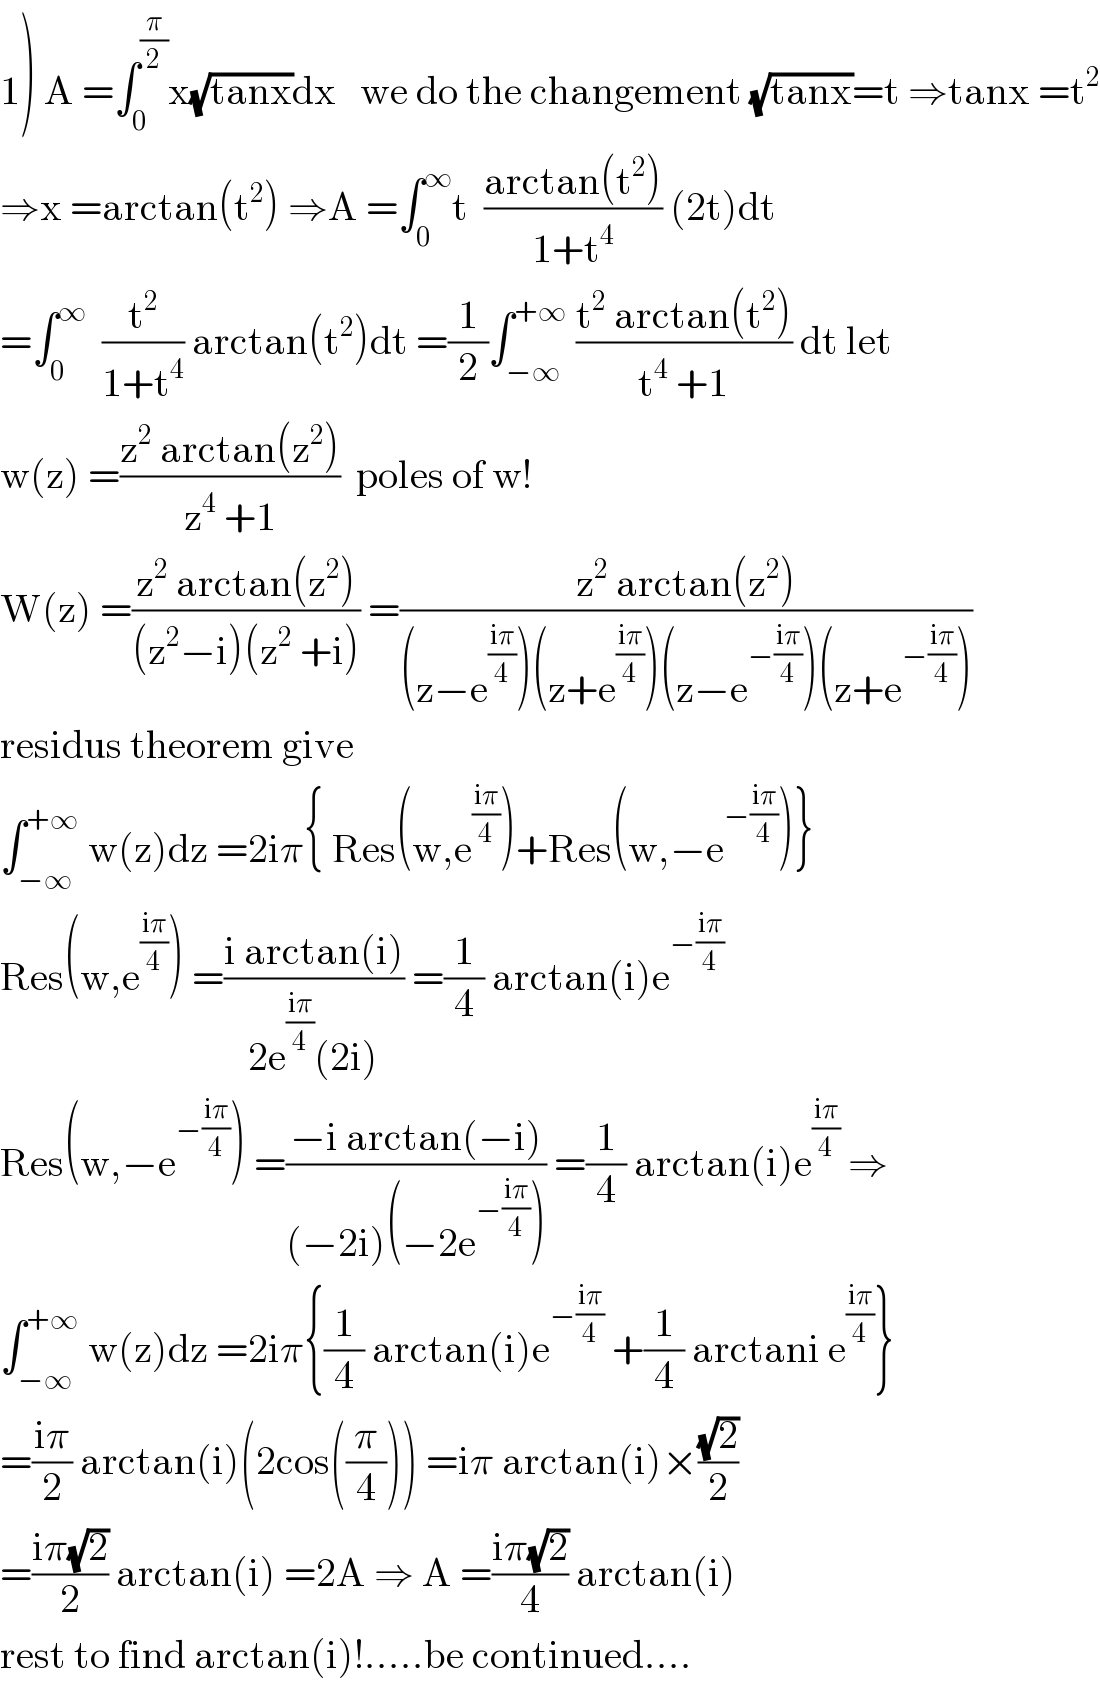 1) A =∫_0 ^(π/2) x(√(tanx))dx   we do the changement (√(tanx))=t ⇒tanx =t^2   ⇒x =arctan(t^2 ) ⇒A =∫_0 ^∞ t  ((arctan(t^2 ))/(1+t^4 )) (2t)dt  =∫_0 ^∞   (t^2 /(1+t^4 )) arctan(t^2 )dt =(1/2)∫_(−∞) ^(+∞)  ((t^2  arctan(t^2 ))/(t^4  +1)) dt let  w(z) =((z^2  arctan(z^2 ))/(z^4  +1))  poles of w!  W(z) =((z^2  arctan(z^2 ))/((z^2 −i)(z^2  +i))) =((z^2  arctan(z^2 ))/((z−e^((iπ)/4) )(z+e^((iπ)/4) )(z−e^(−((iπ)/4)) )(z+e^(−((iπ)/4)) )))  residus theorem give  ∫_(−∞) ^(+∞)  w(z)dz =2iπ{ Res(w,e^((iπ)/4) )+Res(w,−e^(−((iπ)/4)) )}  Res(w,e^((iπ)/4) ) =((i arctan(i))/(2e^((iπ)/4) (2i))) =(1/4) arctan(i)e^(−((iπ)/4))   Res(w,−e^(−((iπ)/4)) ) =((−i arctan(−i))/((−2i)(−2e^(−((iπ)/4)) ))) =(1/4) arctan(i)e^((iπ)/4)  ⇒  ∫_(−∞) ^(+∞)  w(z)dz =2iπ{(1/4) arctan(i)e^(−((iπ)/4))  +(1/4) arctani e^((iπ)/4) }  =((iπ)/2) arctan(i)(2cos((π/4))) =iπ arctan(i)×((√2)/2)  =((iπ(√2))/2) arctan(i) =2A ⇒ A =((iπ(√2))/4) arctan(i)  rest to find arctan(i)!.....be continued....  